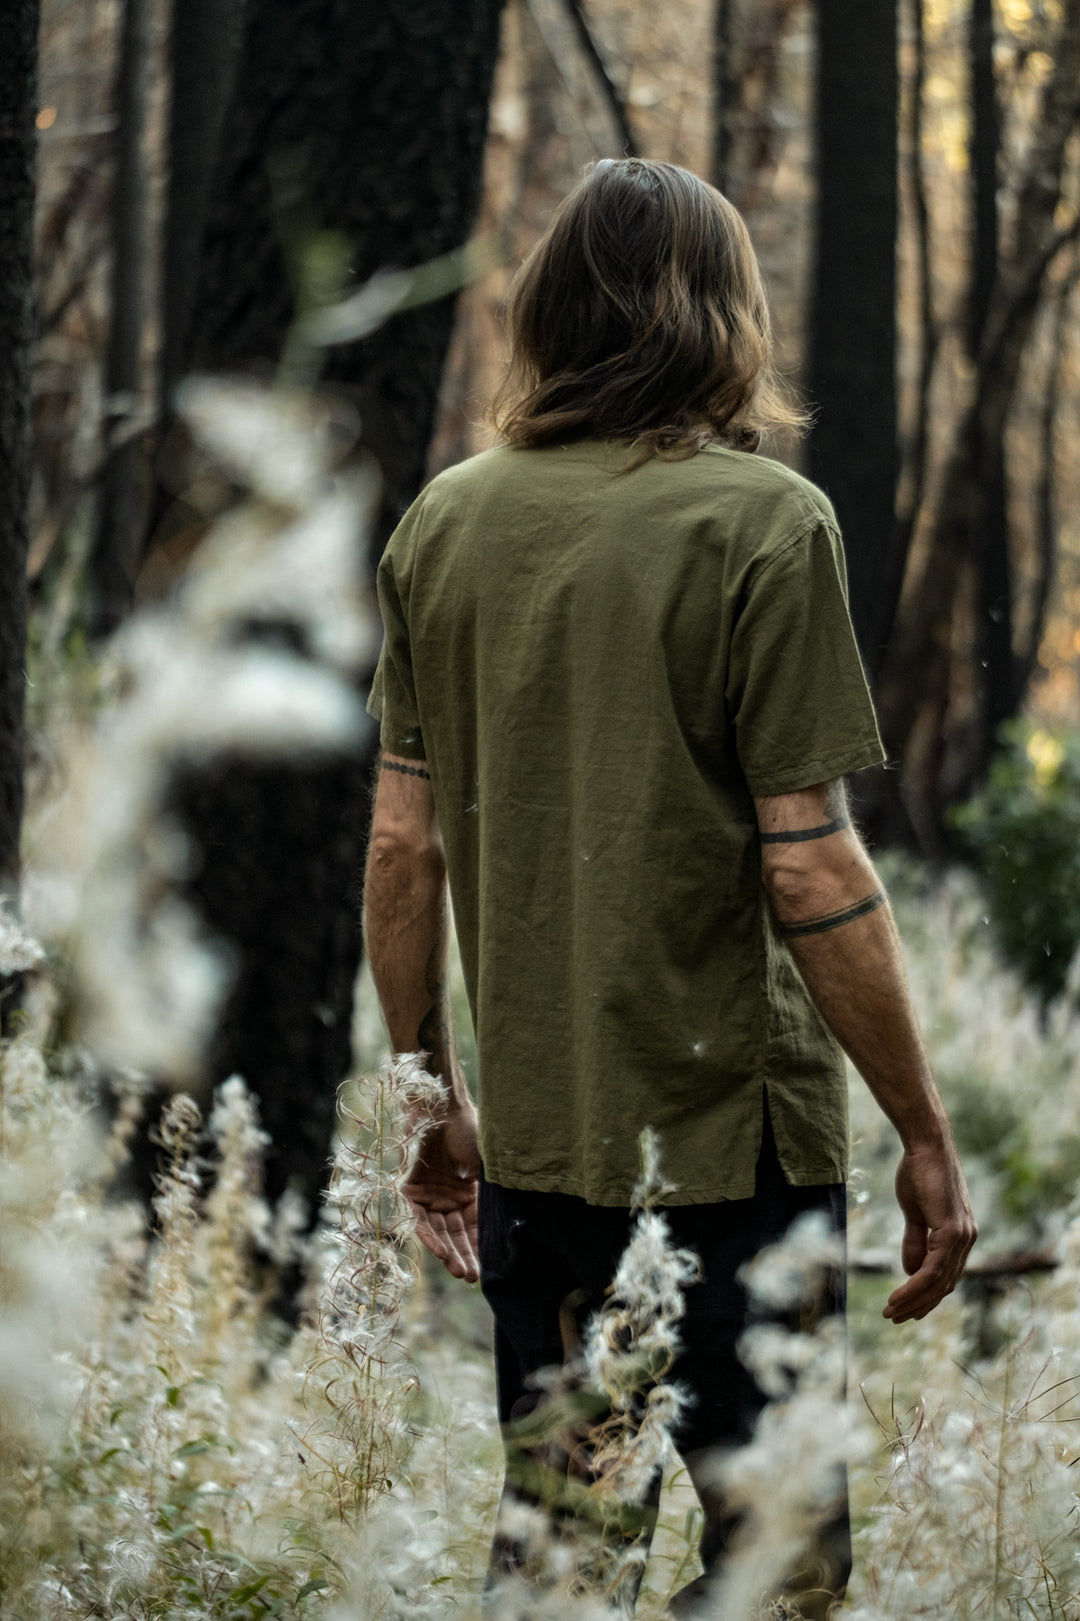 Back side of person in olive green shirt with short sleeves and black pants walking through forest and plants.